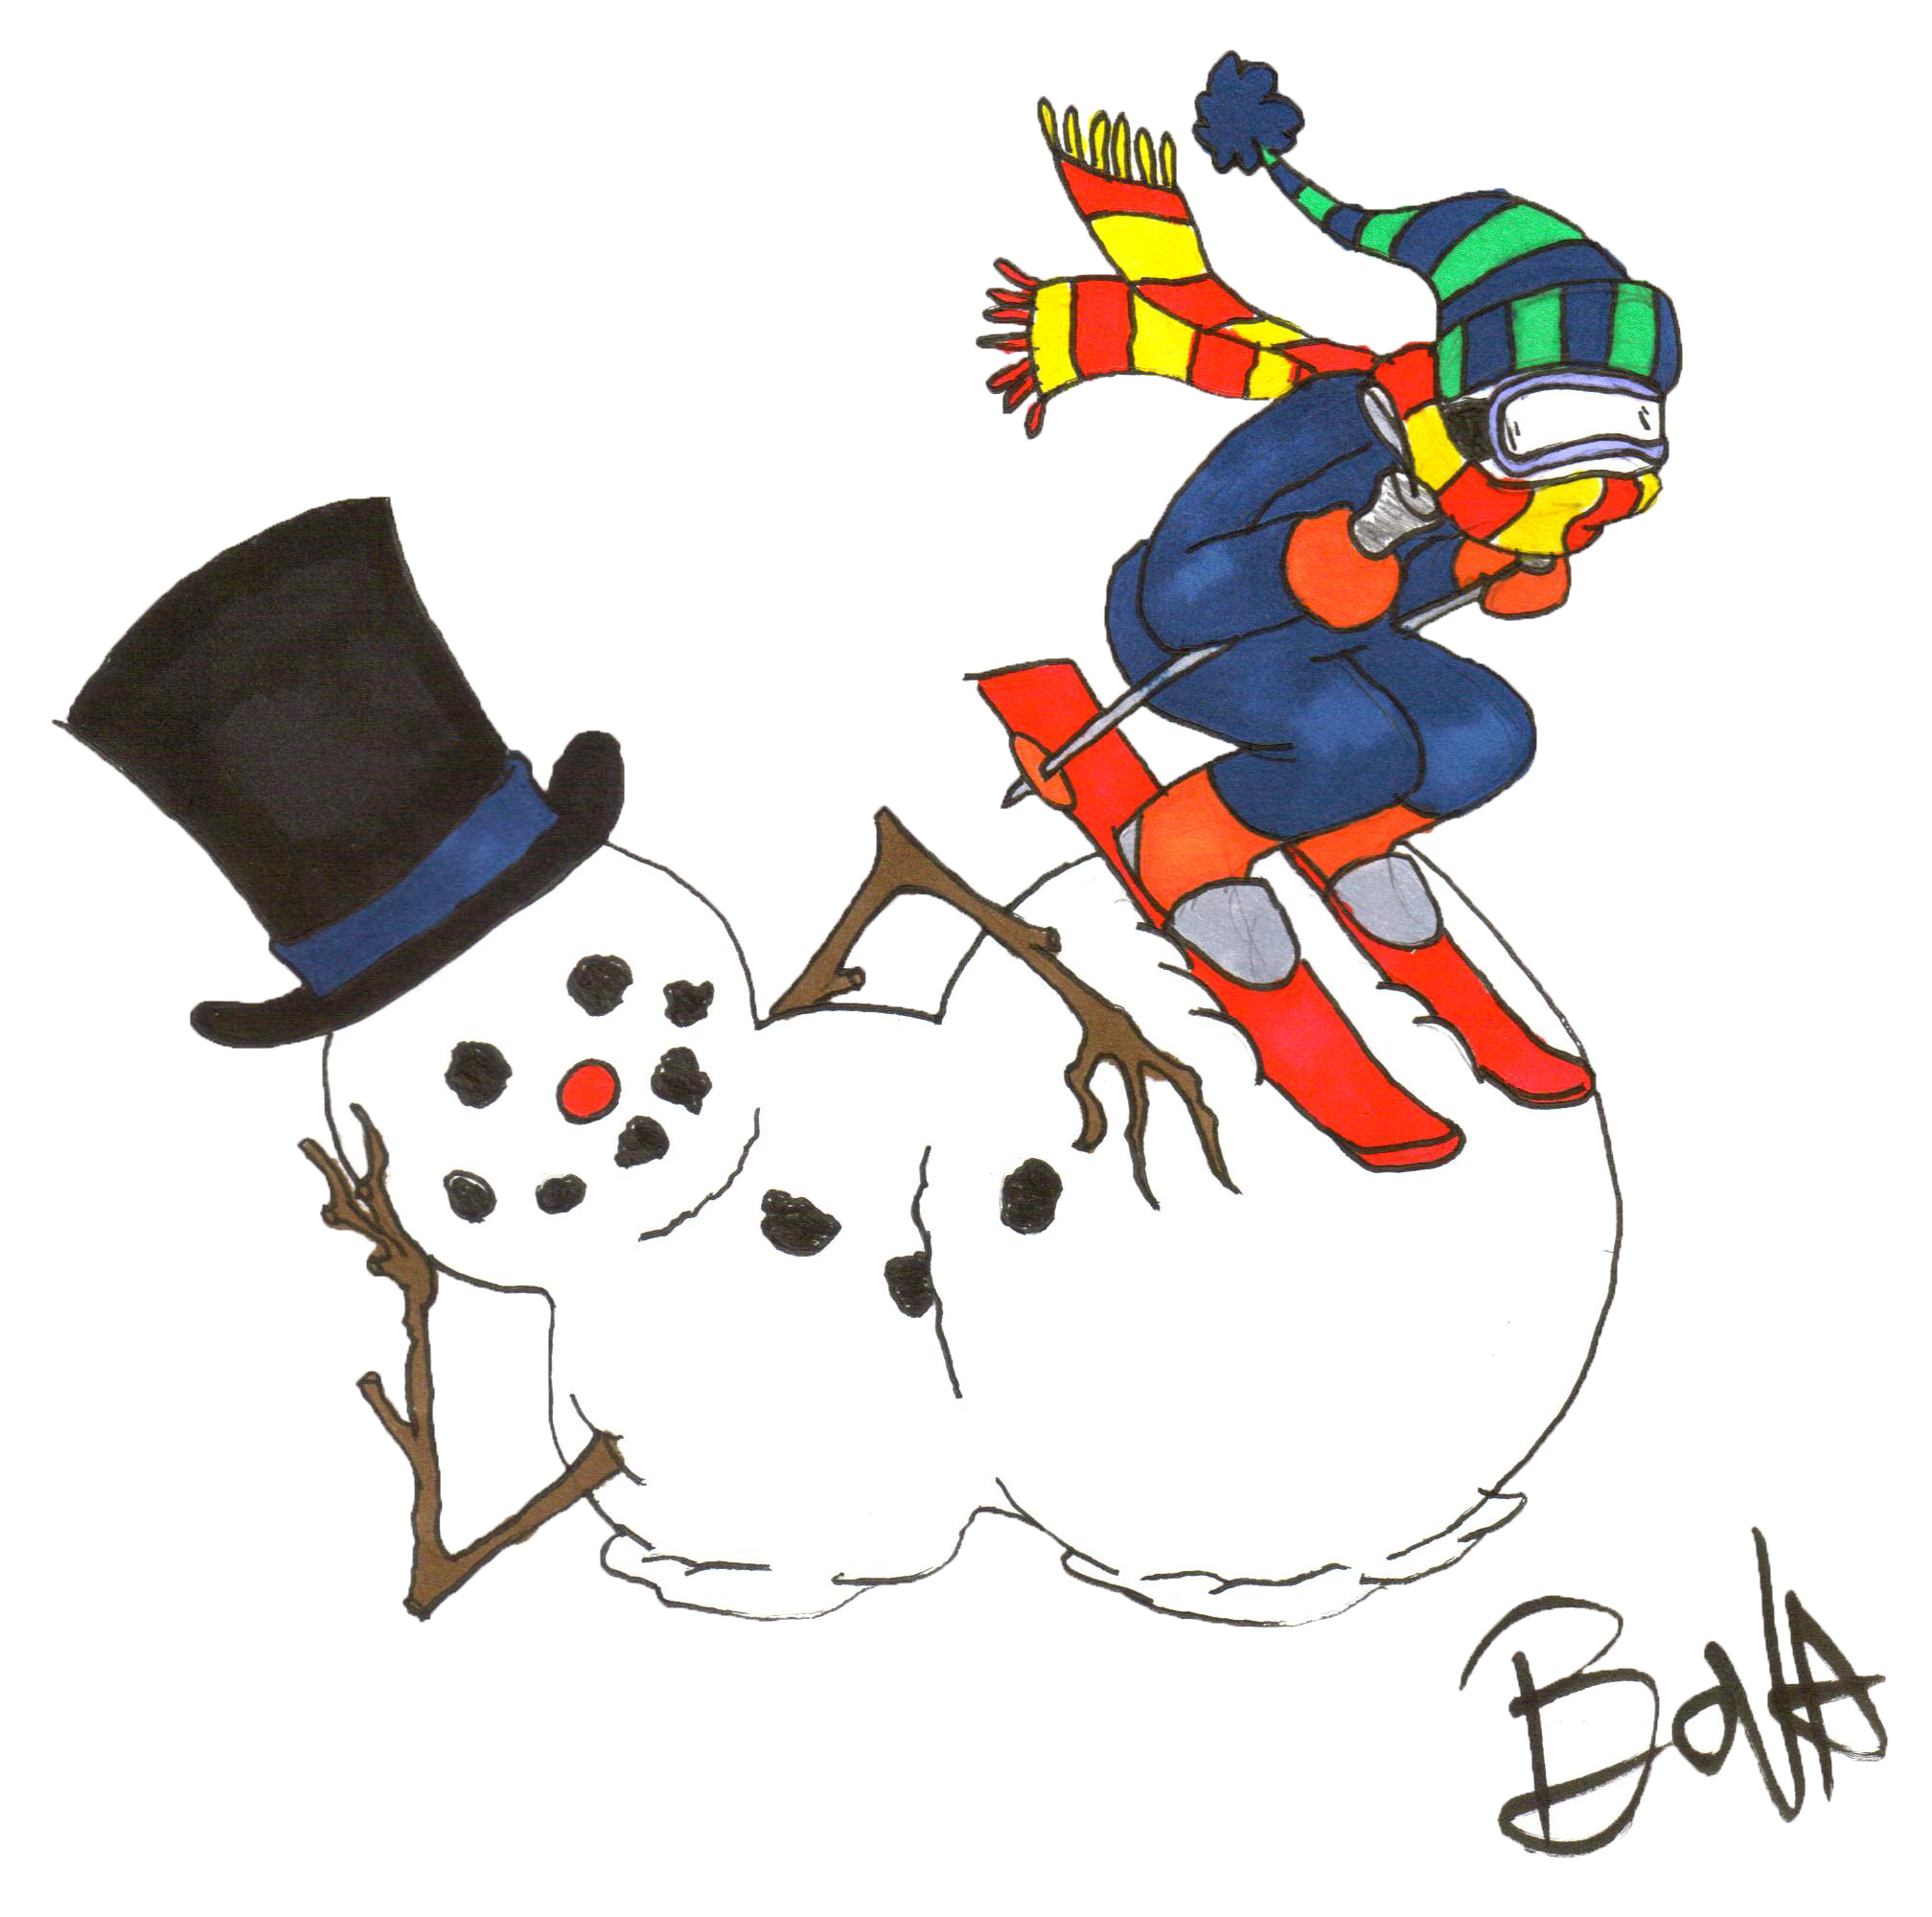 Free pictures of activities. Winter clipart activity